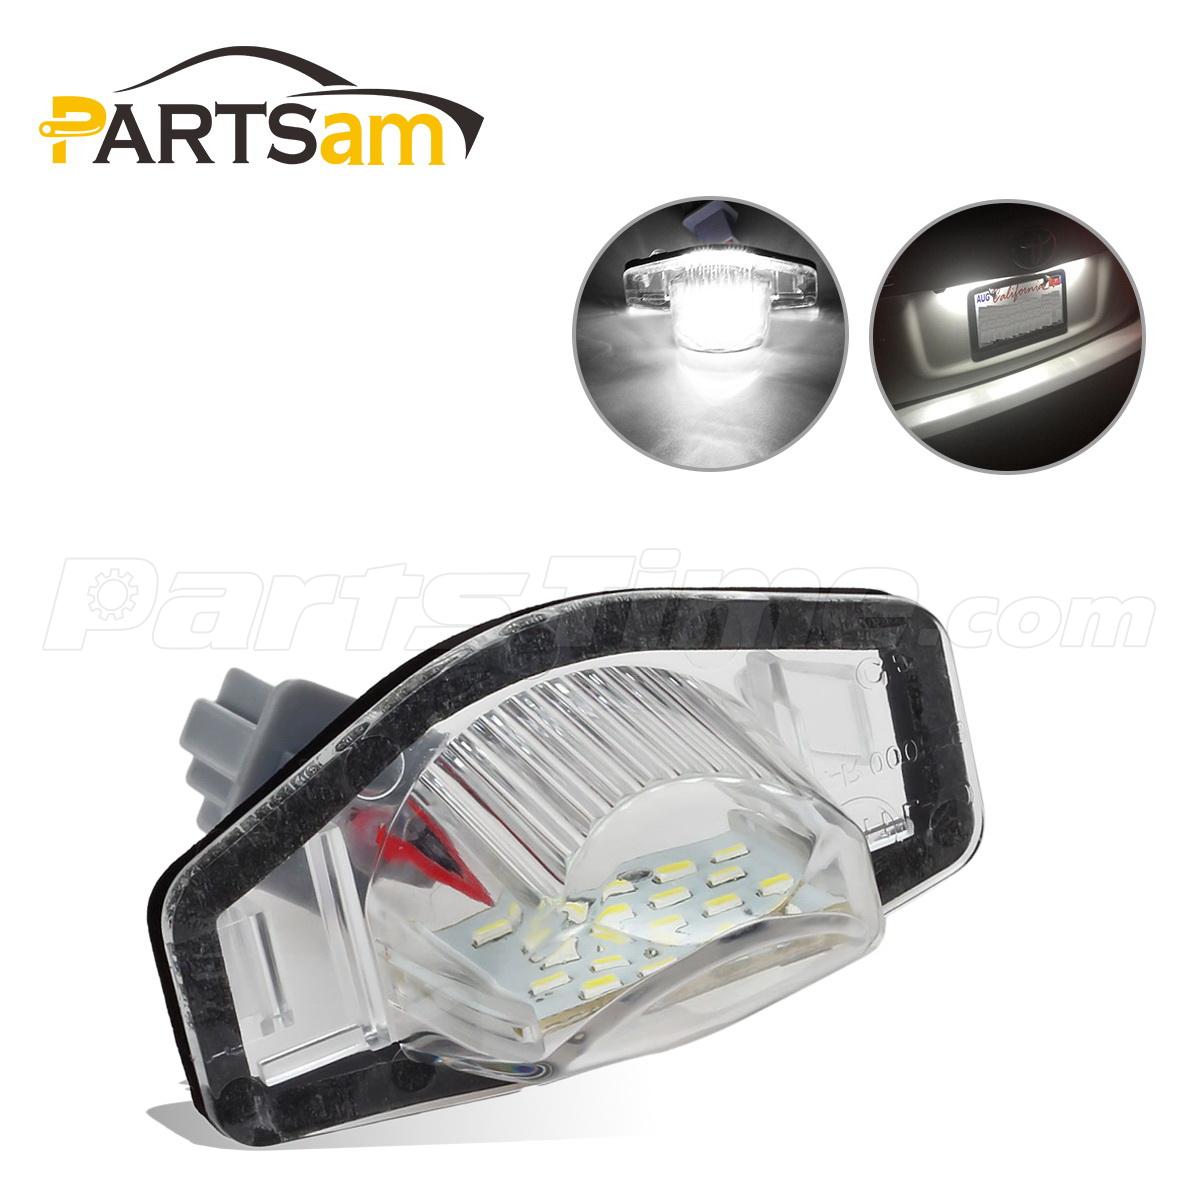 2x White 18-SMD License Plate Lights Lamps for Honda Fit Odyssey Stream Insight | eBay 2006 Honda Odyssey License Plate Bulb Replacement